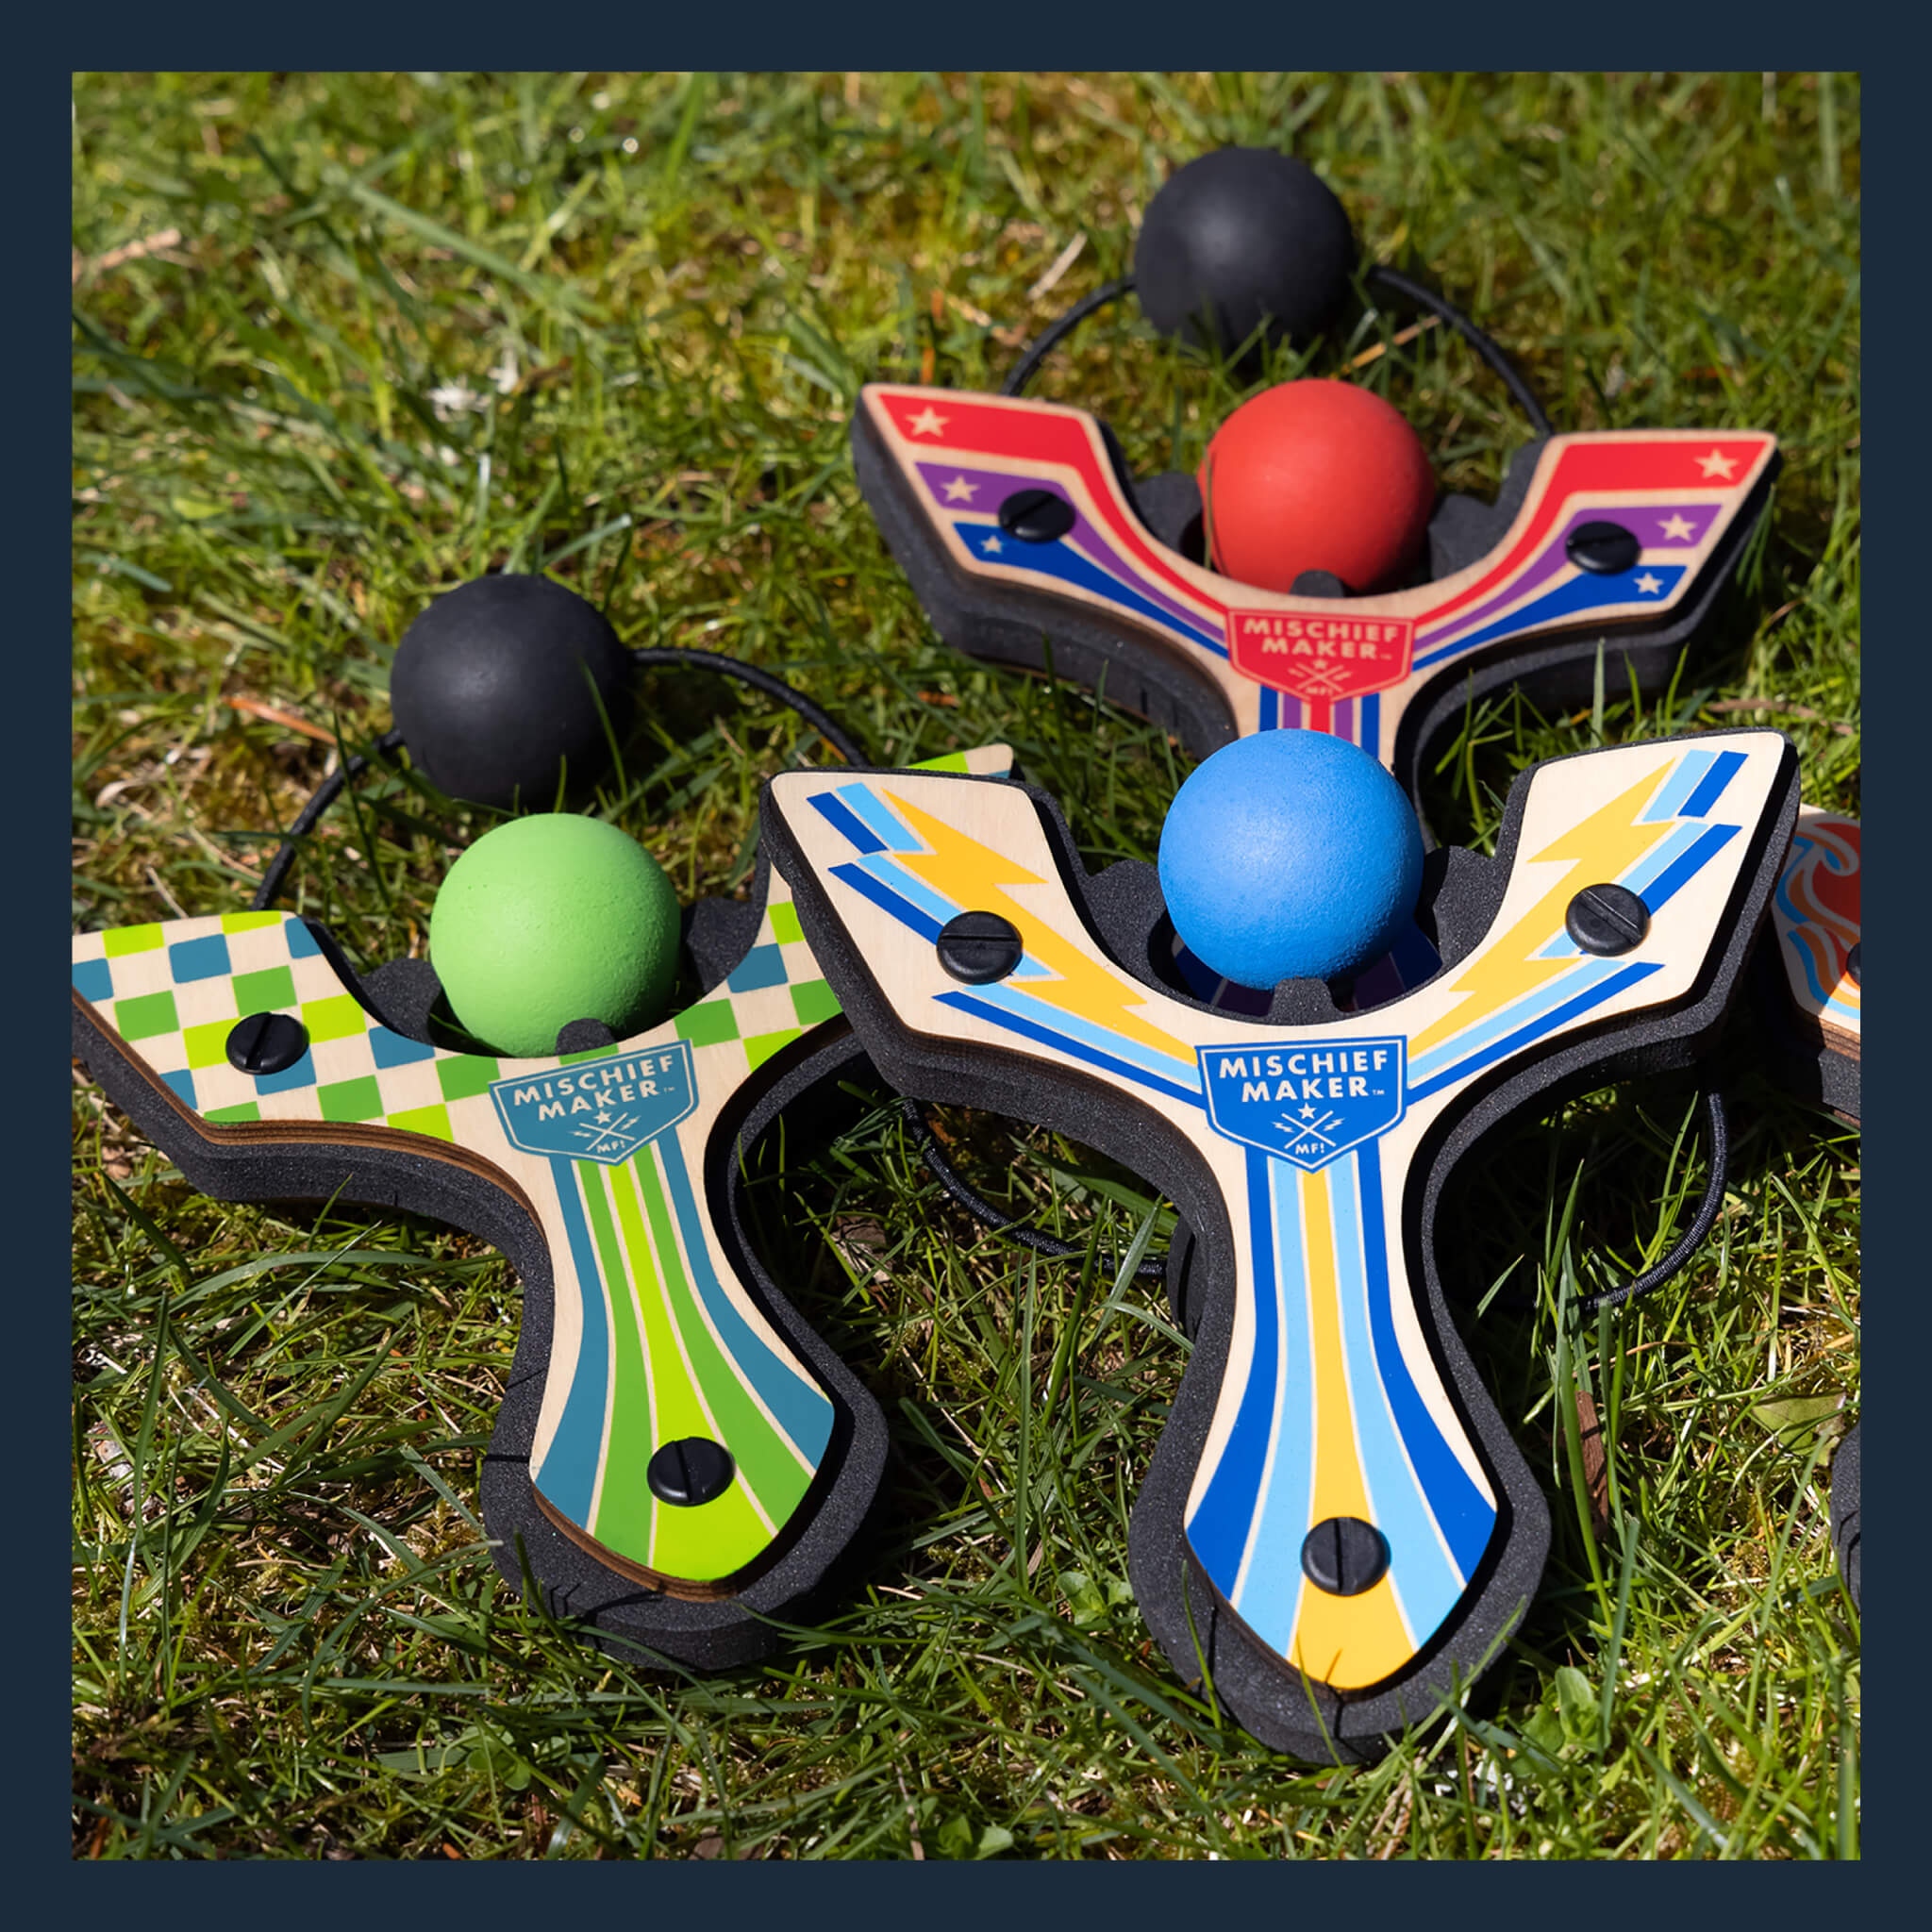 Racing best slingshot on the grass including blue, green, and red by Mighty Fun!